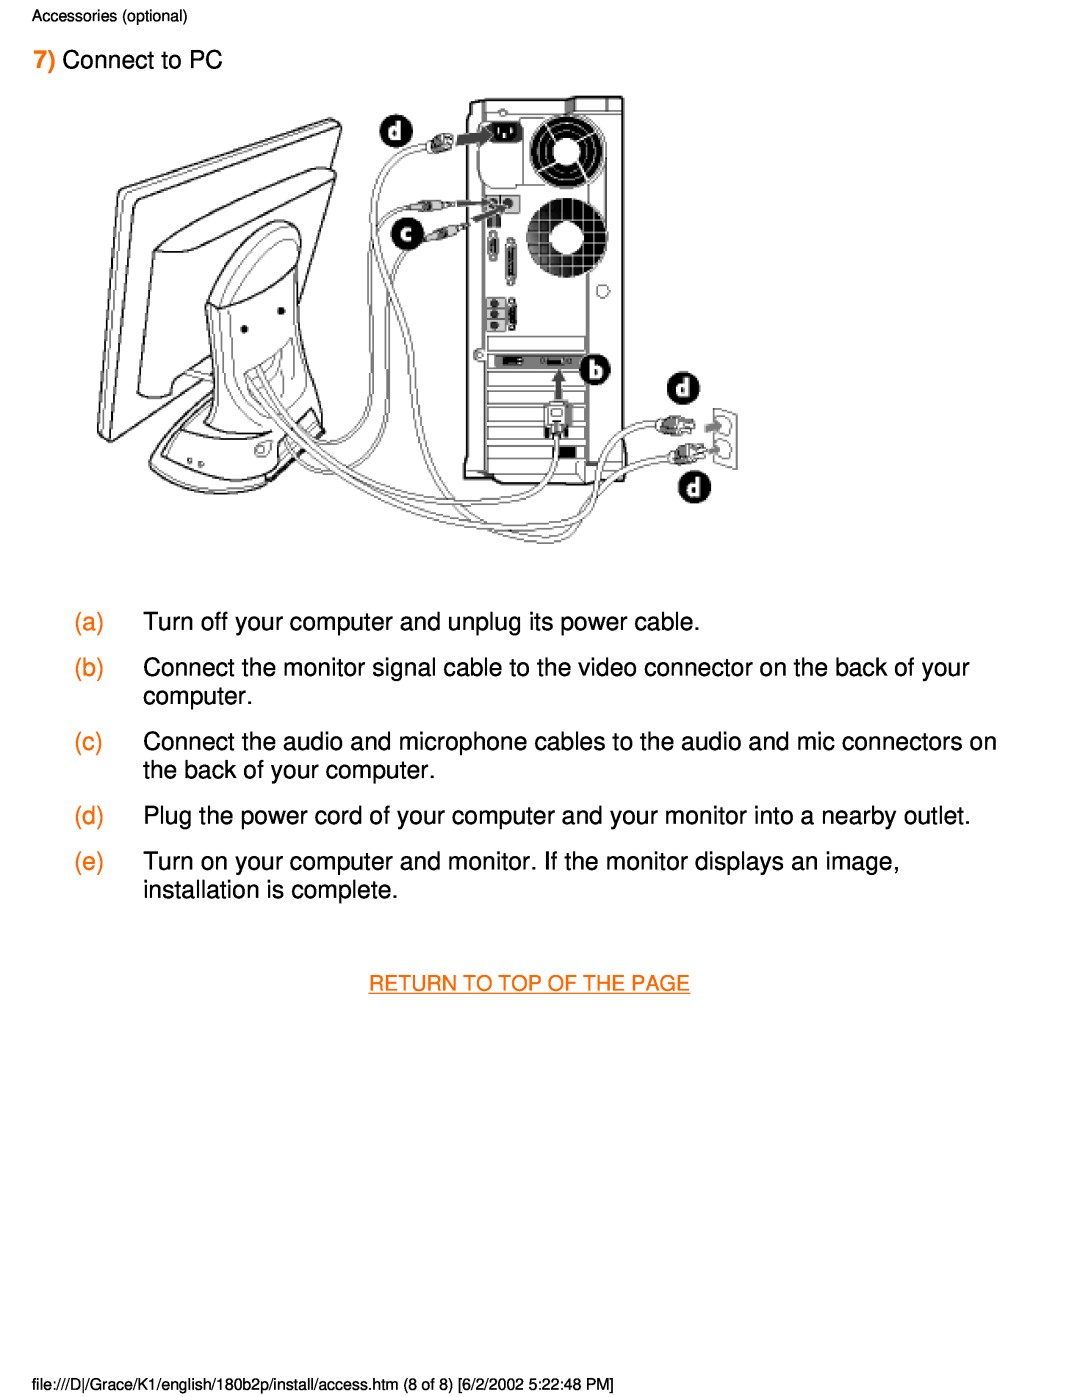 Philips 180B2P user manual 7Connect to PC 